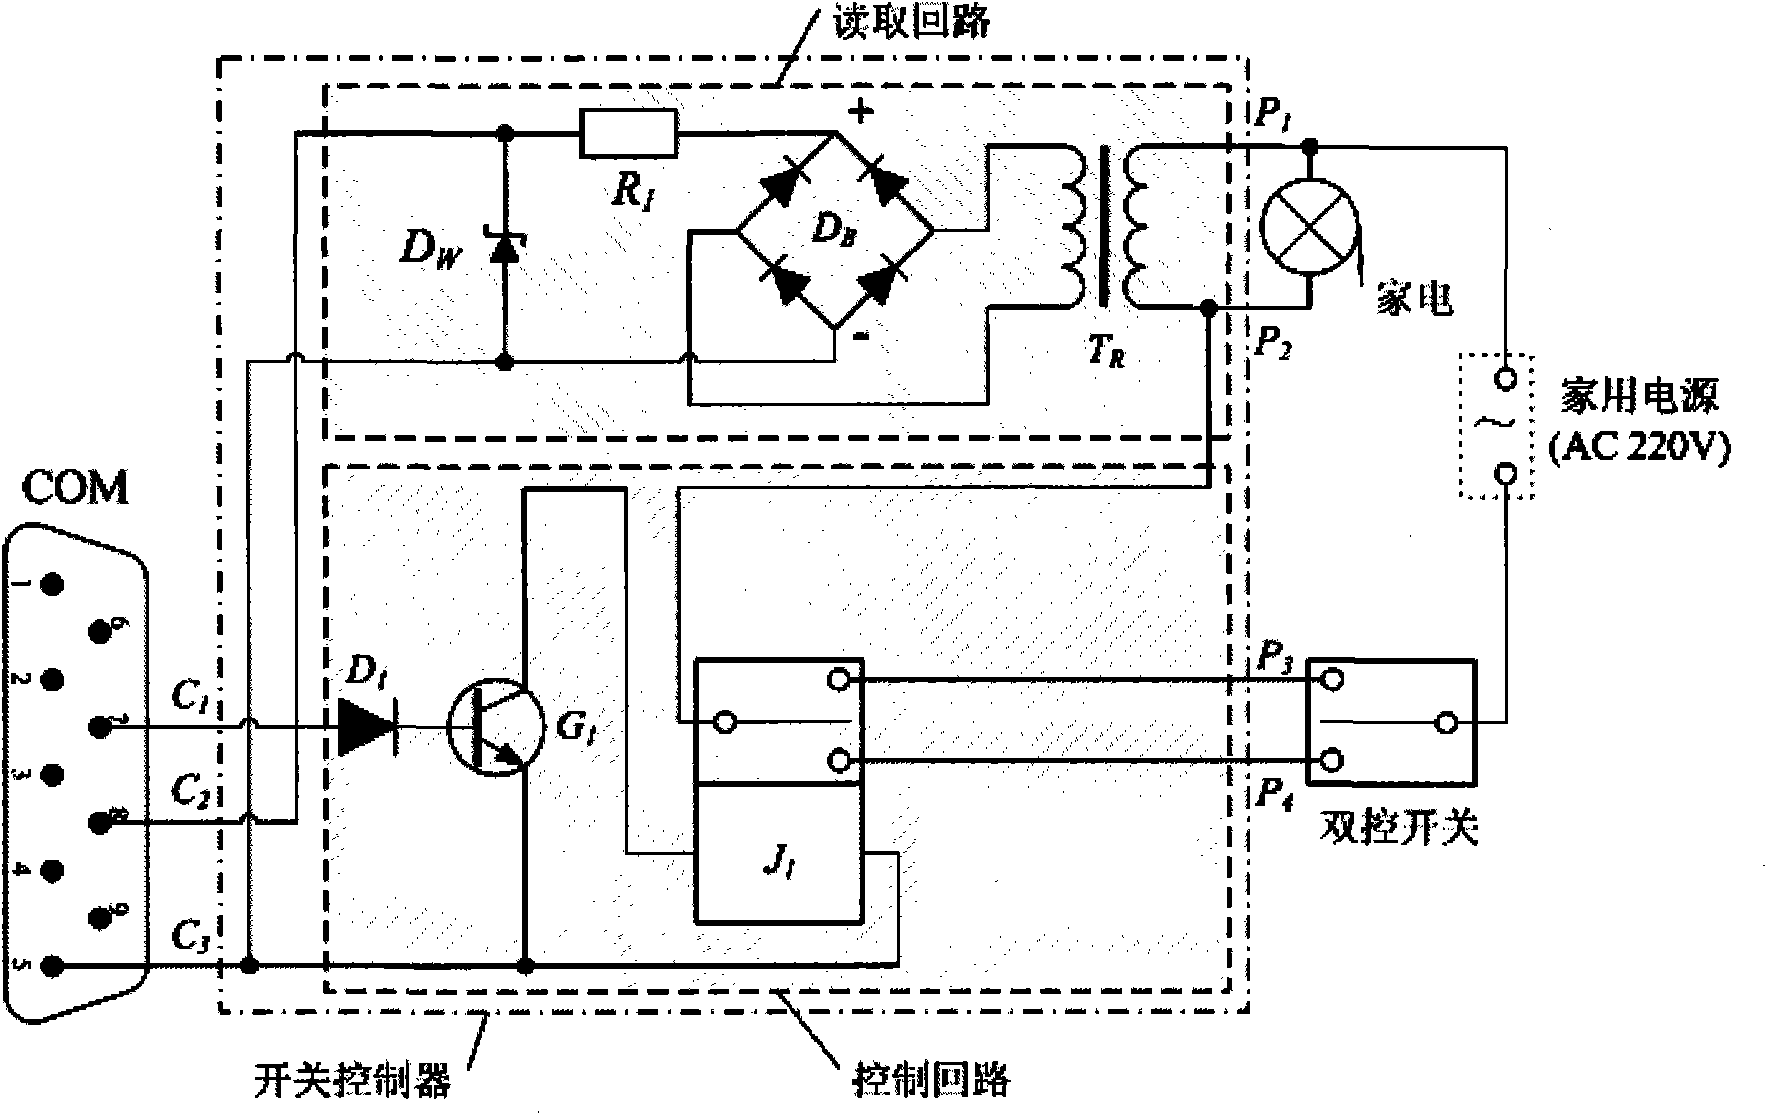 Mobile-network-based system for remotely controlling turning on and turning off of home appliances by cell phone